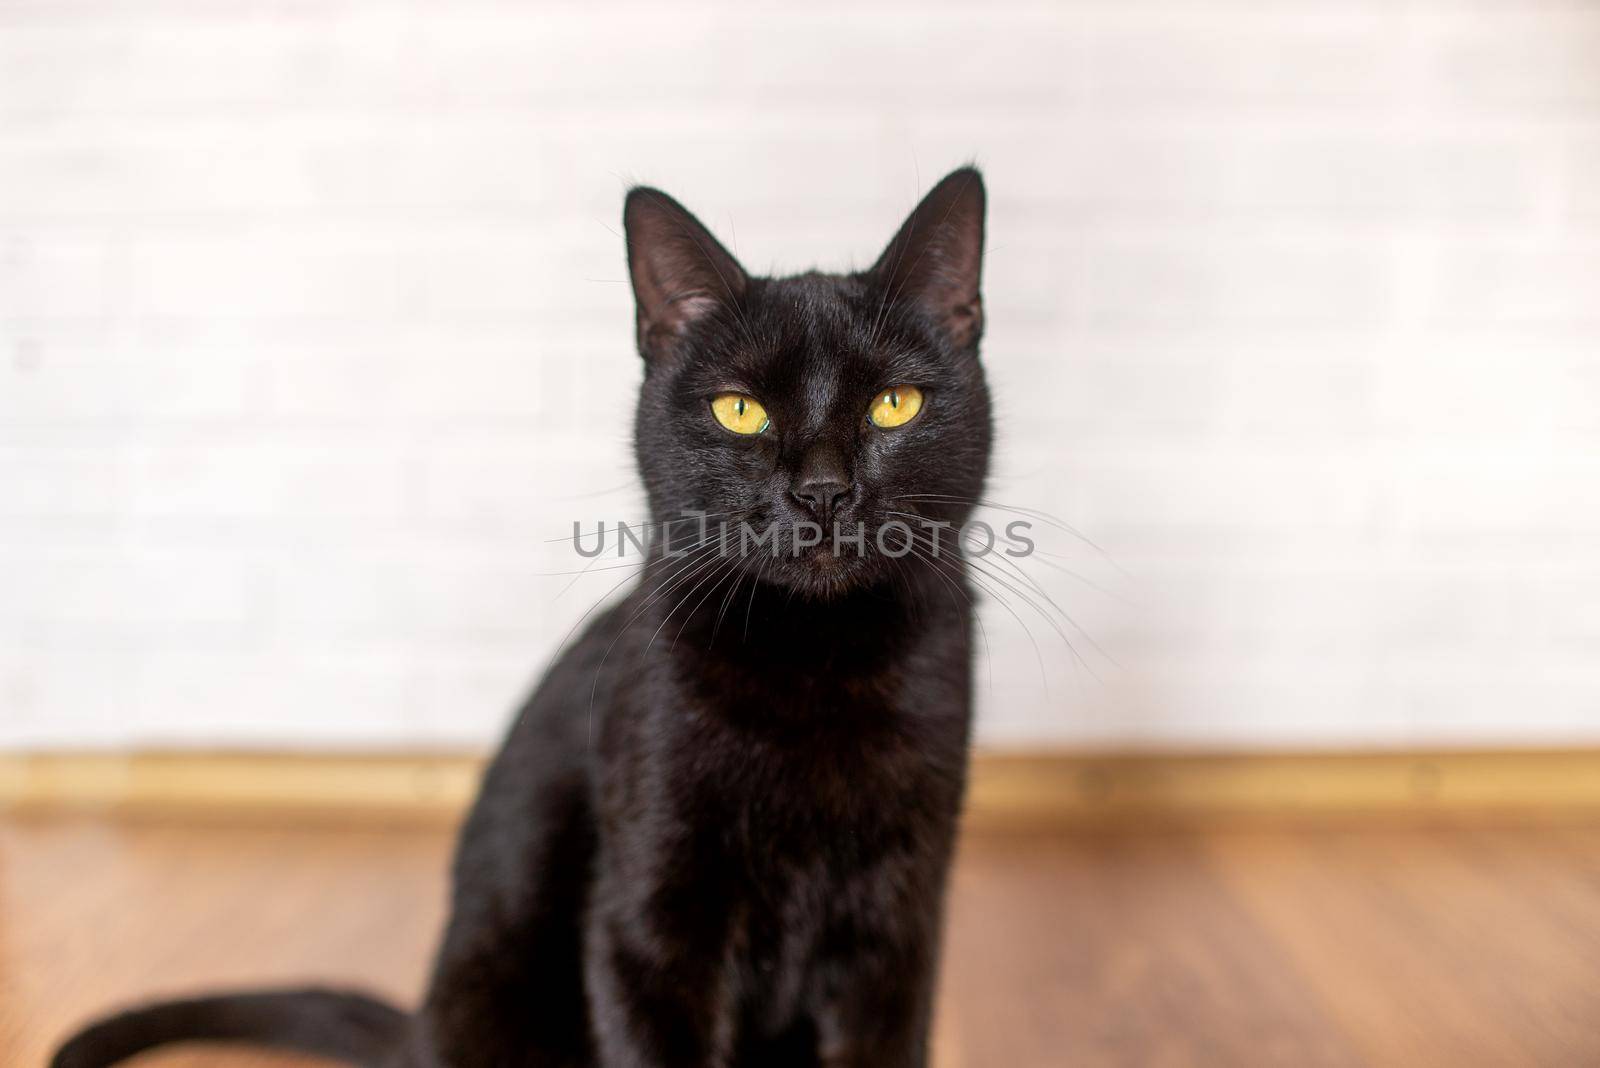 black cat with yellow eyes sits on a laminate by ozornina